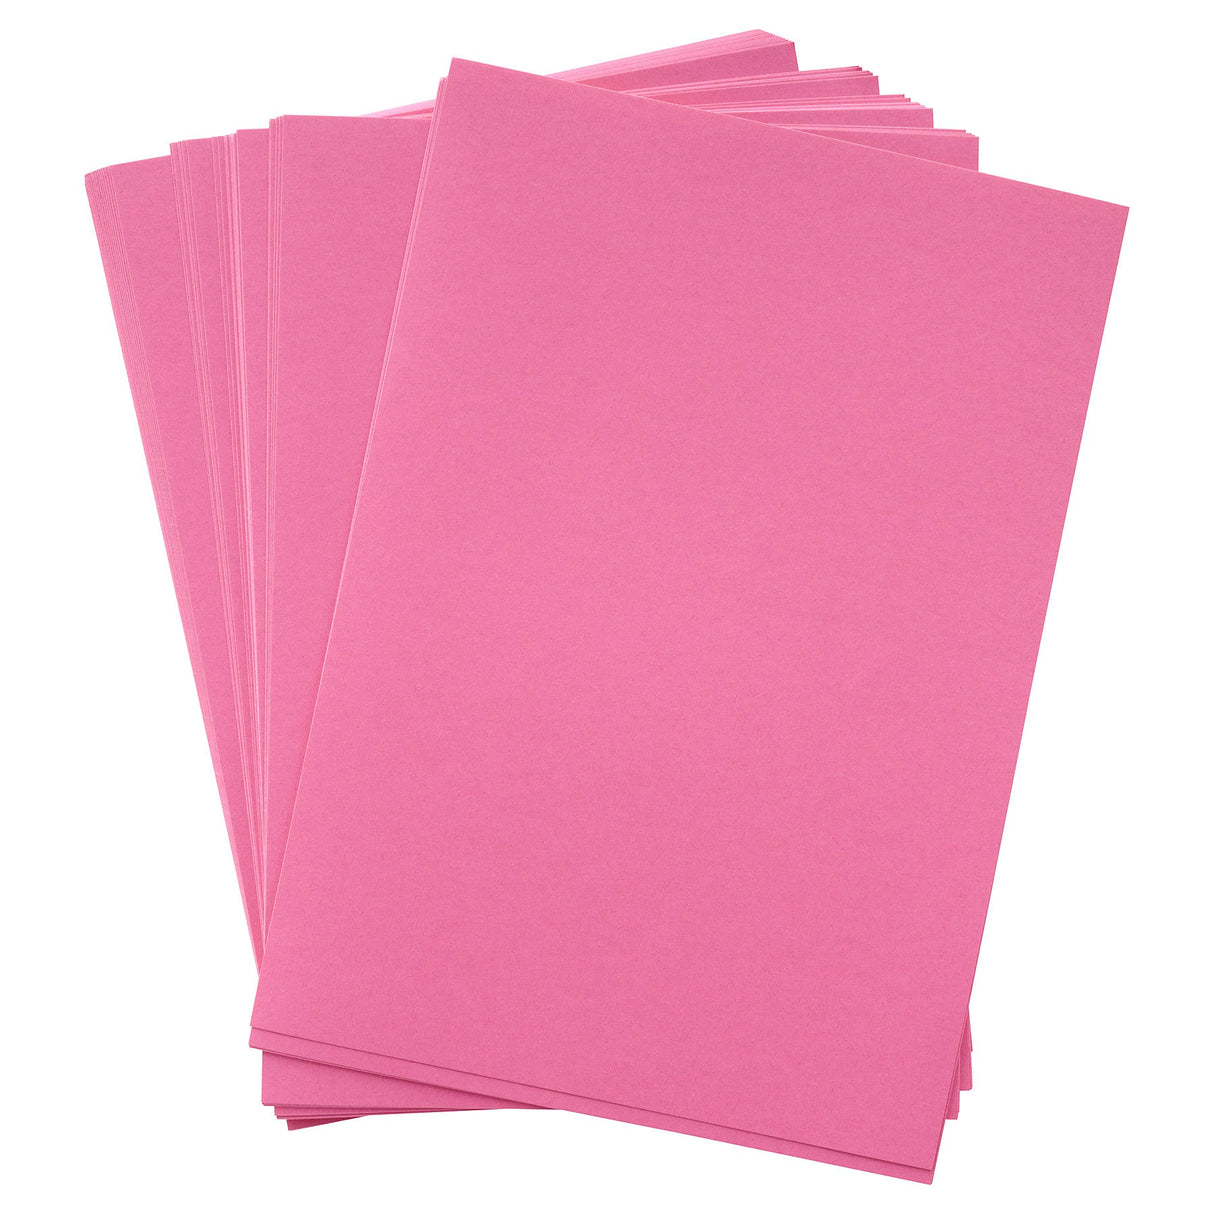 Premier Activity A4 160gsm Card - Fuchsia - 50 Sheets-Craft Paper & Card-Premier | Buy Online at Stationery Shop